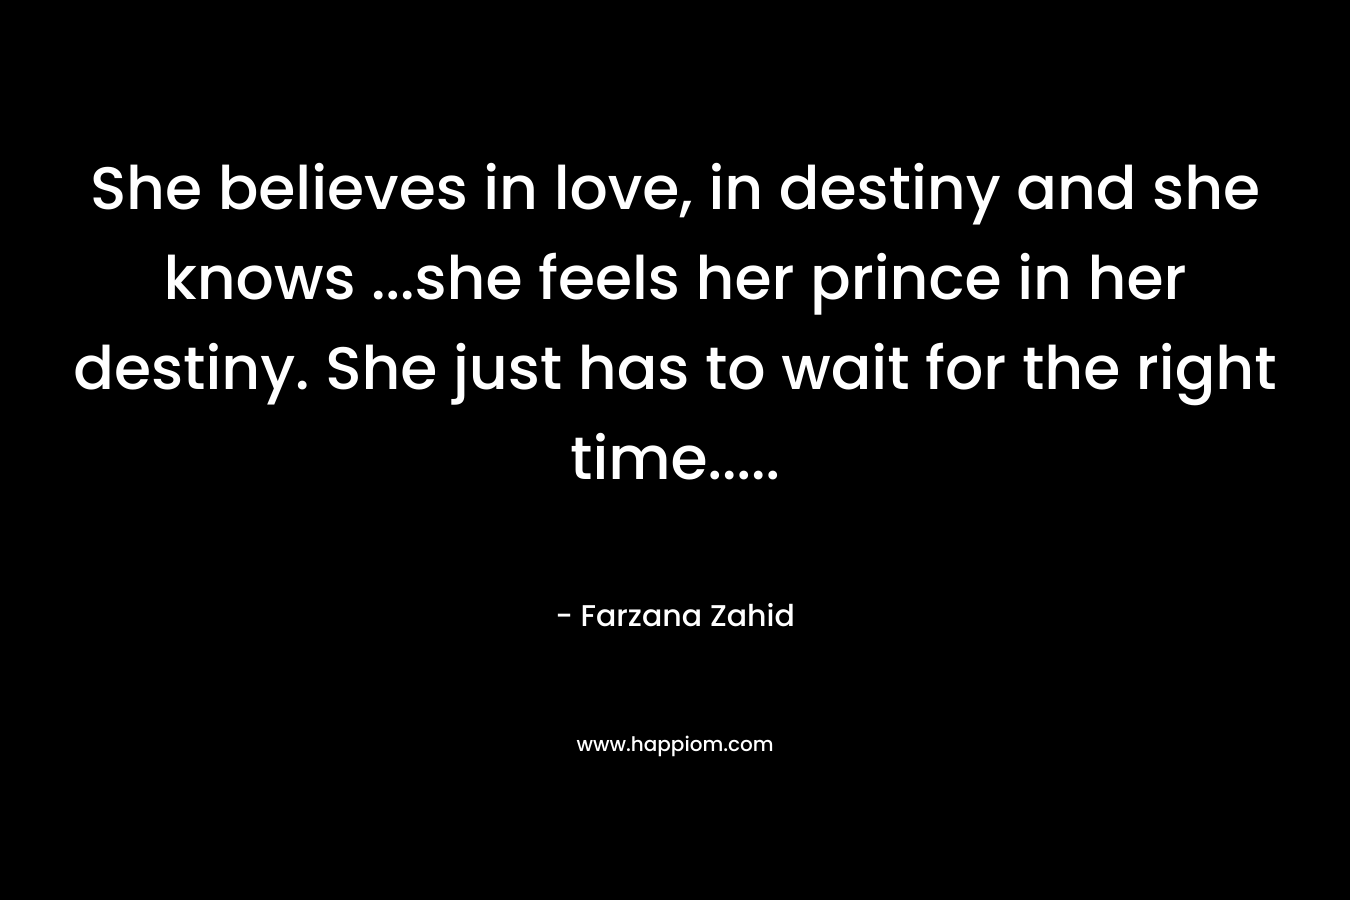 She believes in love, in destiny and she knows ...she feels her prince in her destiny. She just has to wait for the right time.....